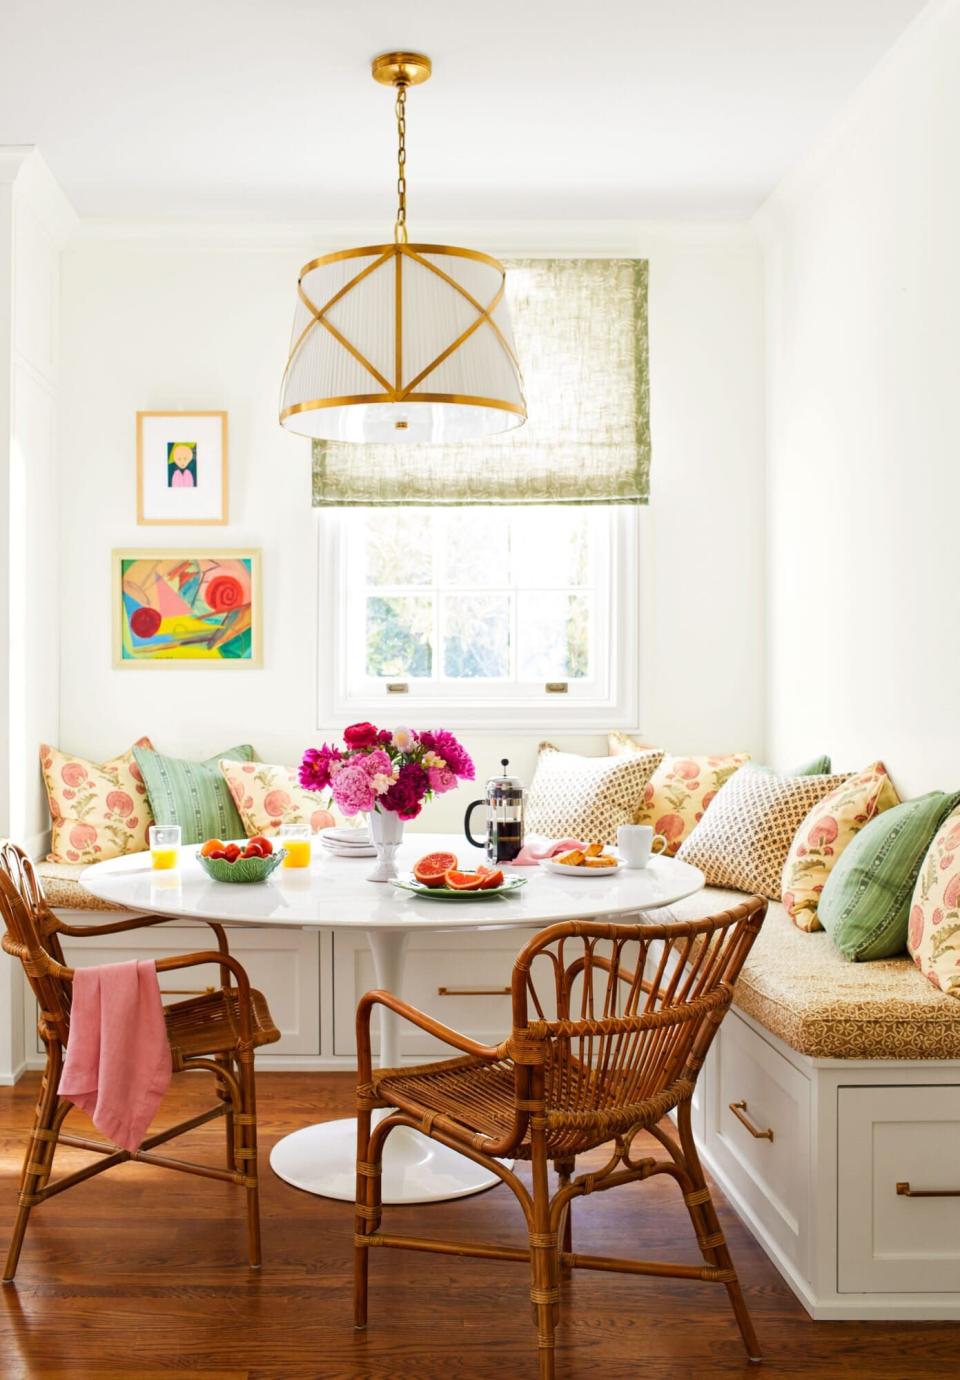 Colorful Breakfast Nook with Banquet Seating